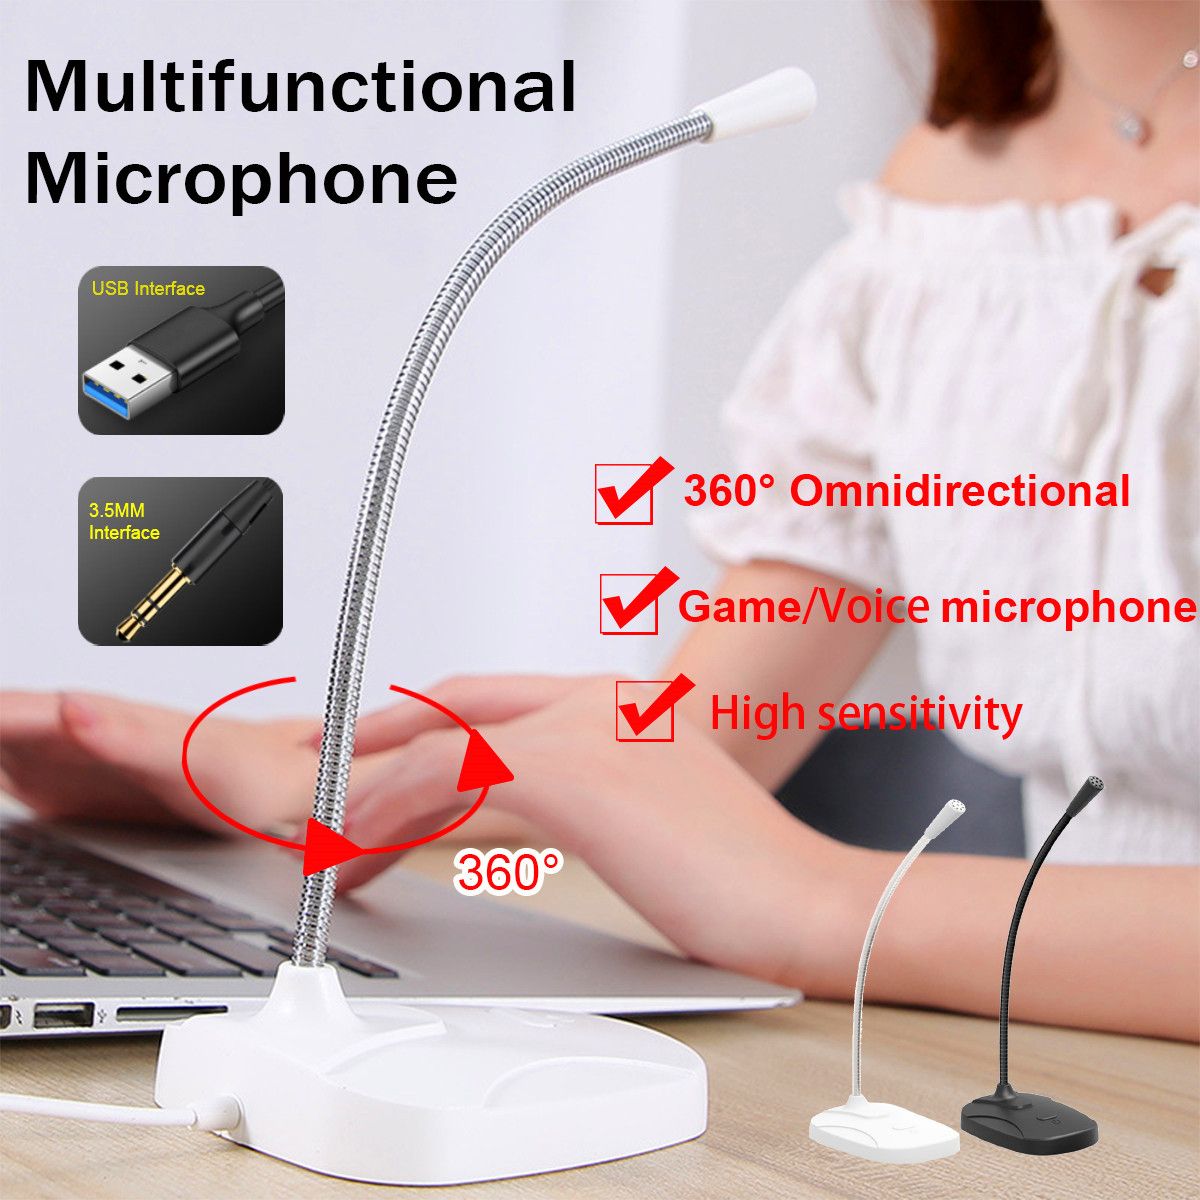 Bakeey-Wired-Microphone-USB-Desktop-Notebook-Voice-Universal-Live-Microphone-Meeting-Online-Classroo-1747399